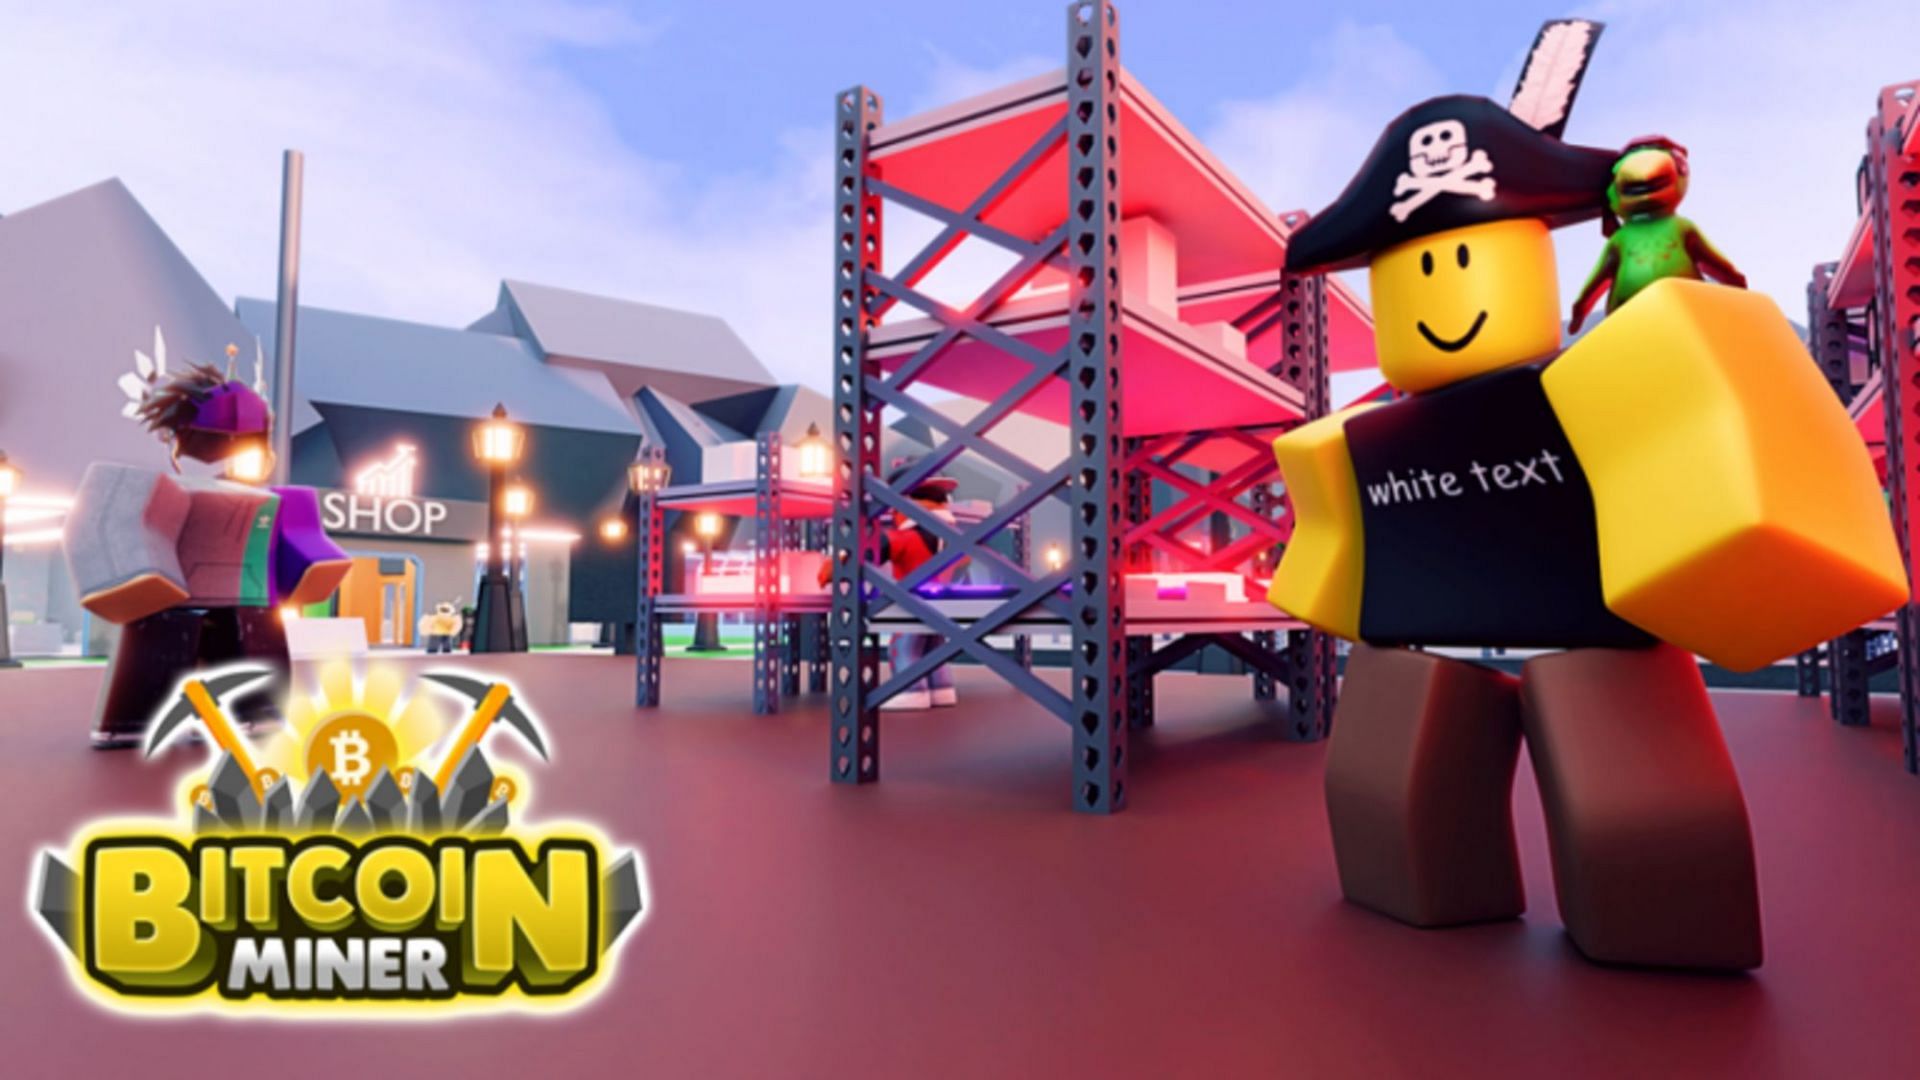 Players can mine Bitcoins and other cryptocurrencies in the universe of Bitcoin Miner (Image via Roblox)